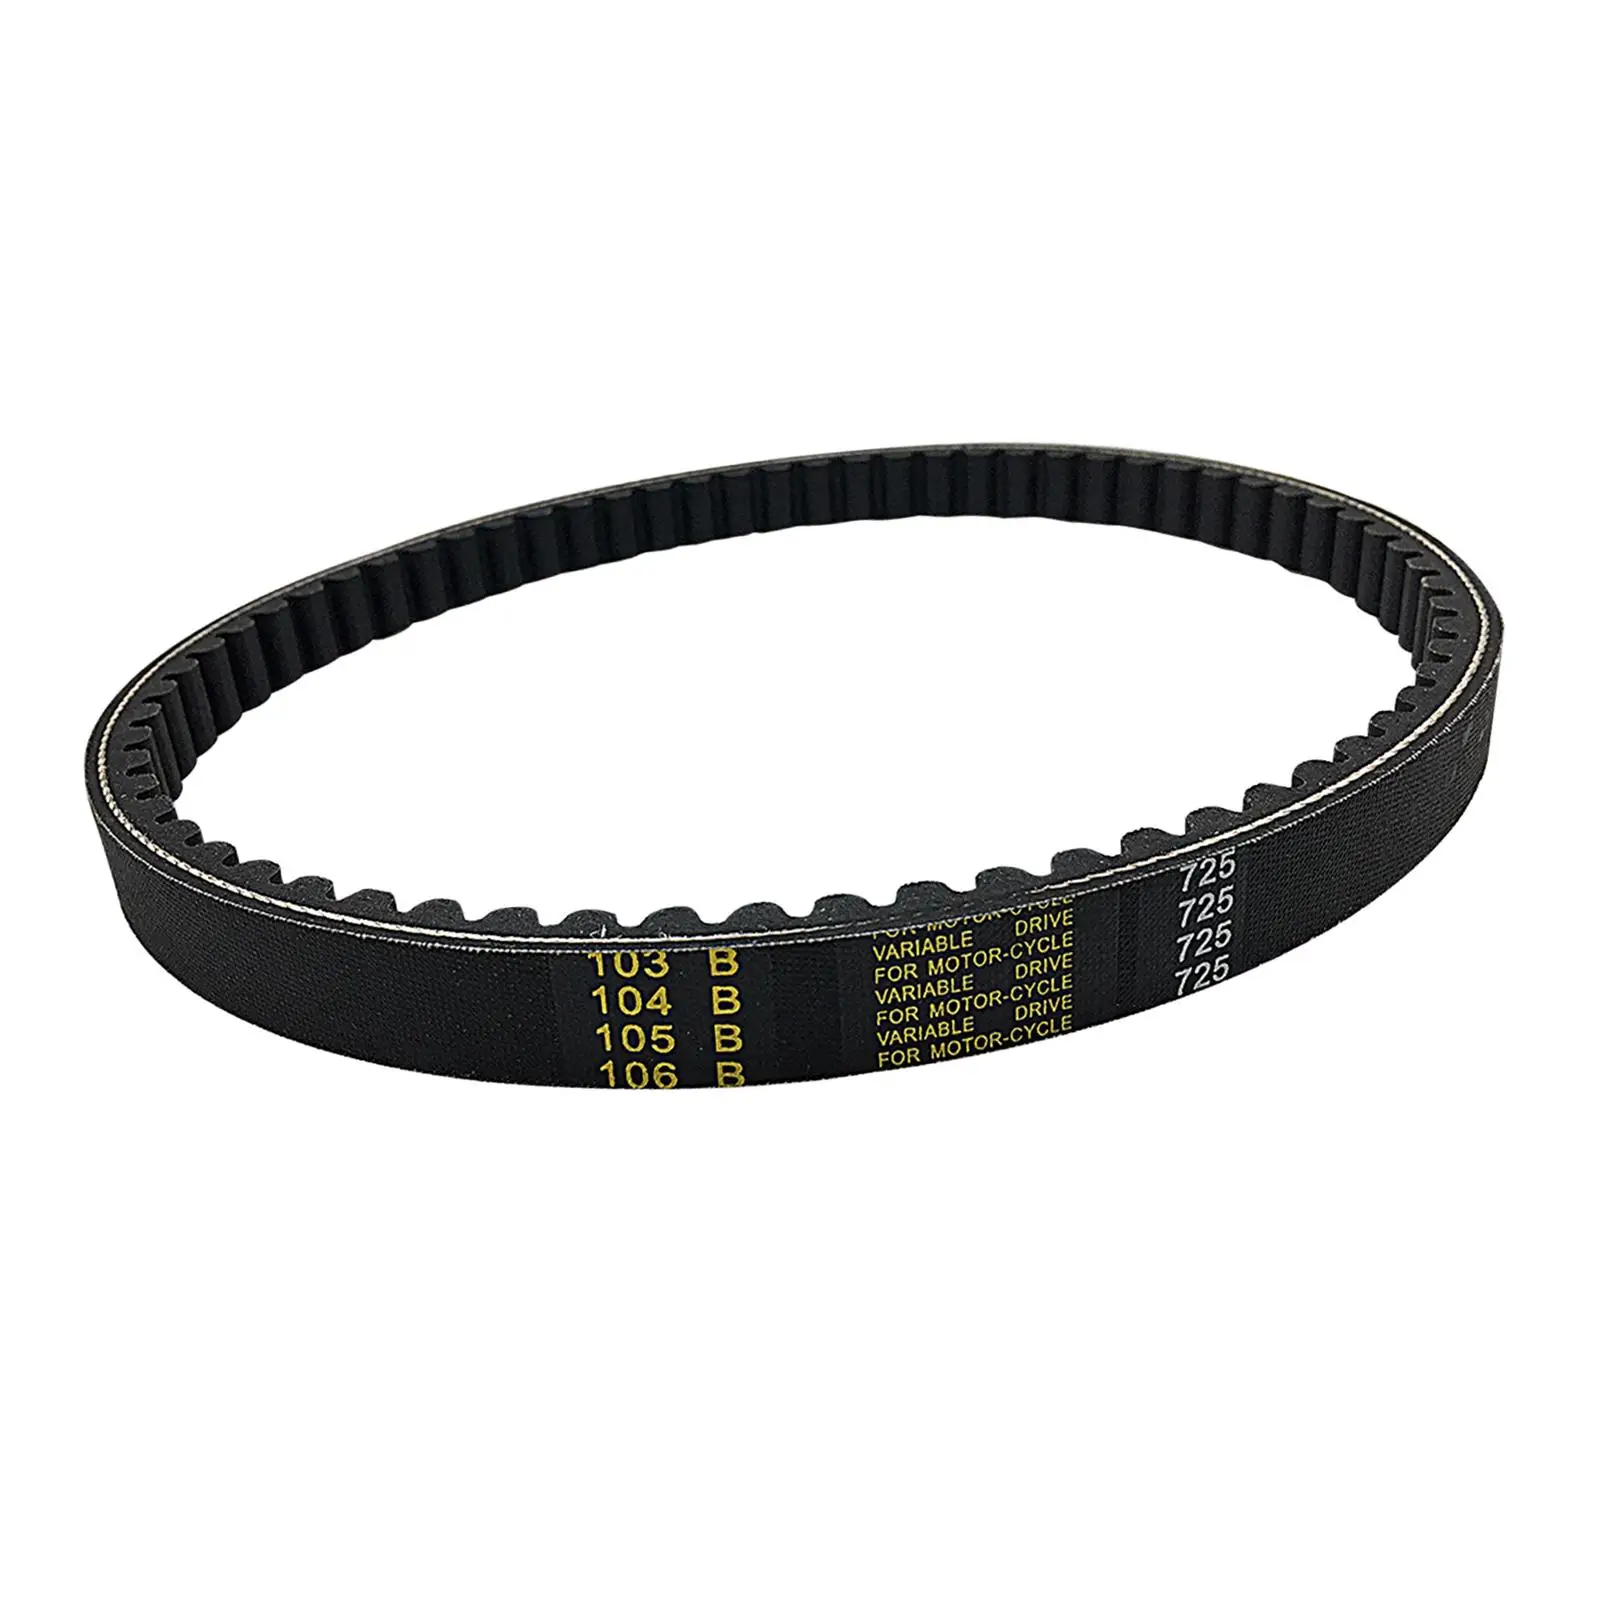 Drive Belt 725 High Performance Durable Easy to Install Rubber Premium Spare Parts Replaces for 30 Series Torque Converter